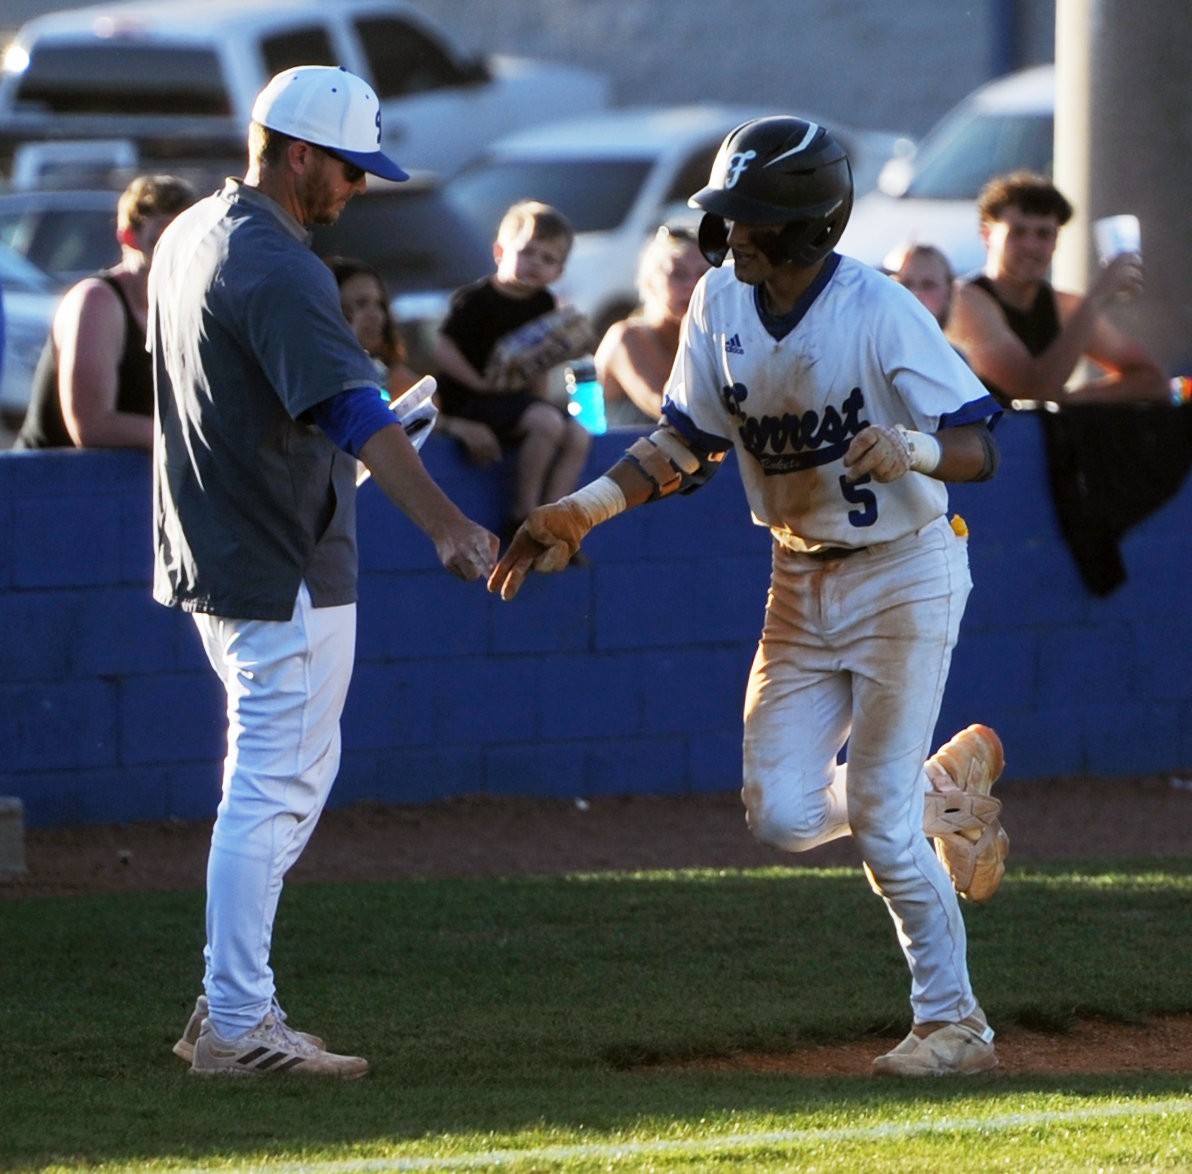 Rocket senior Camden Vaughn catches a fist bump from coach Andy Burkett after mashing a grand slam in the third inning against Stratford on Monday.